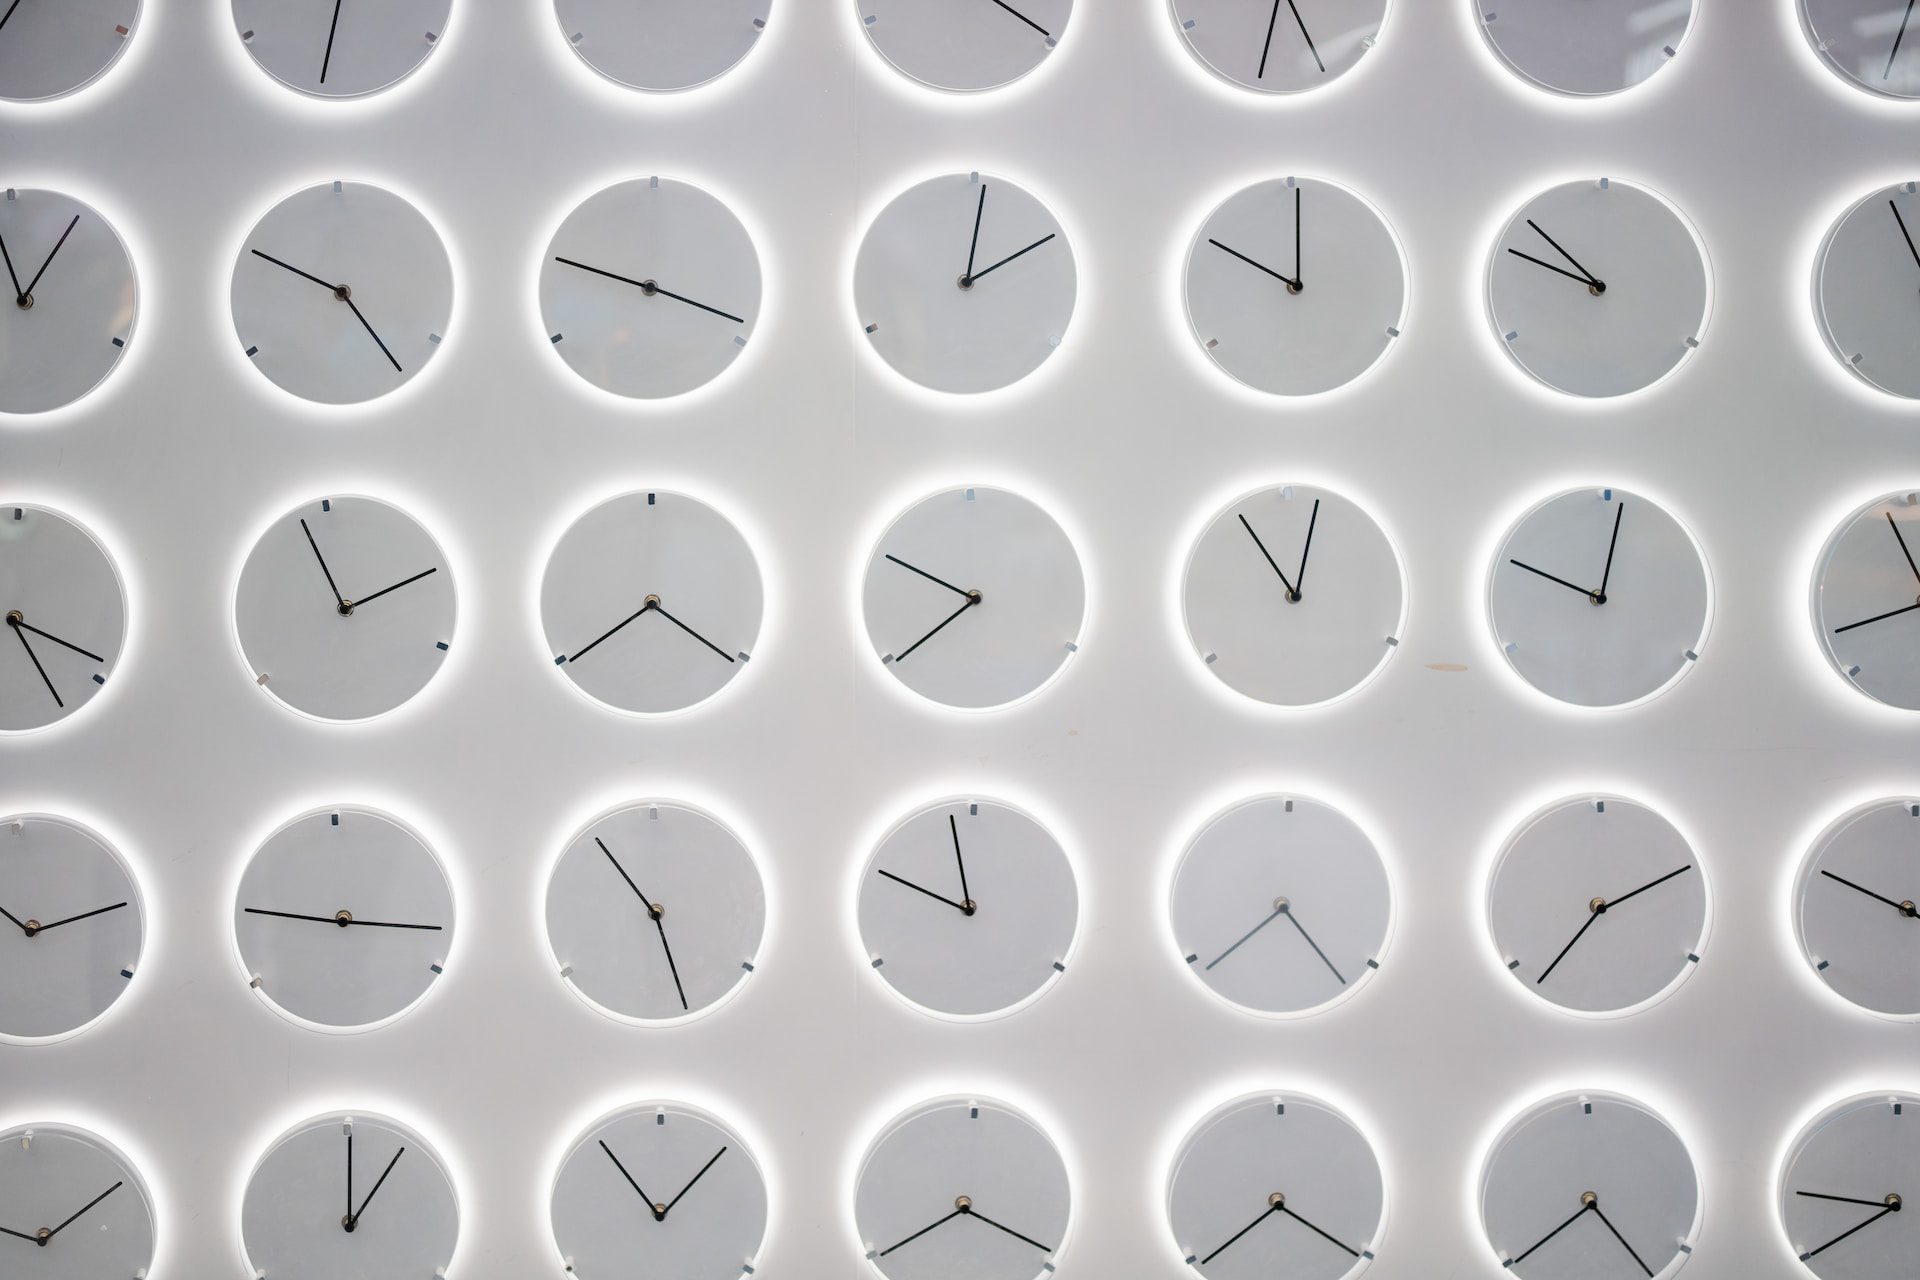 White wall covered in uniform white clocks all showing different times